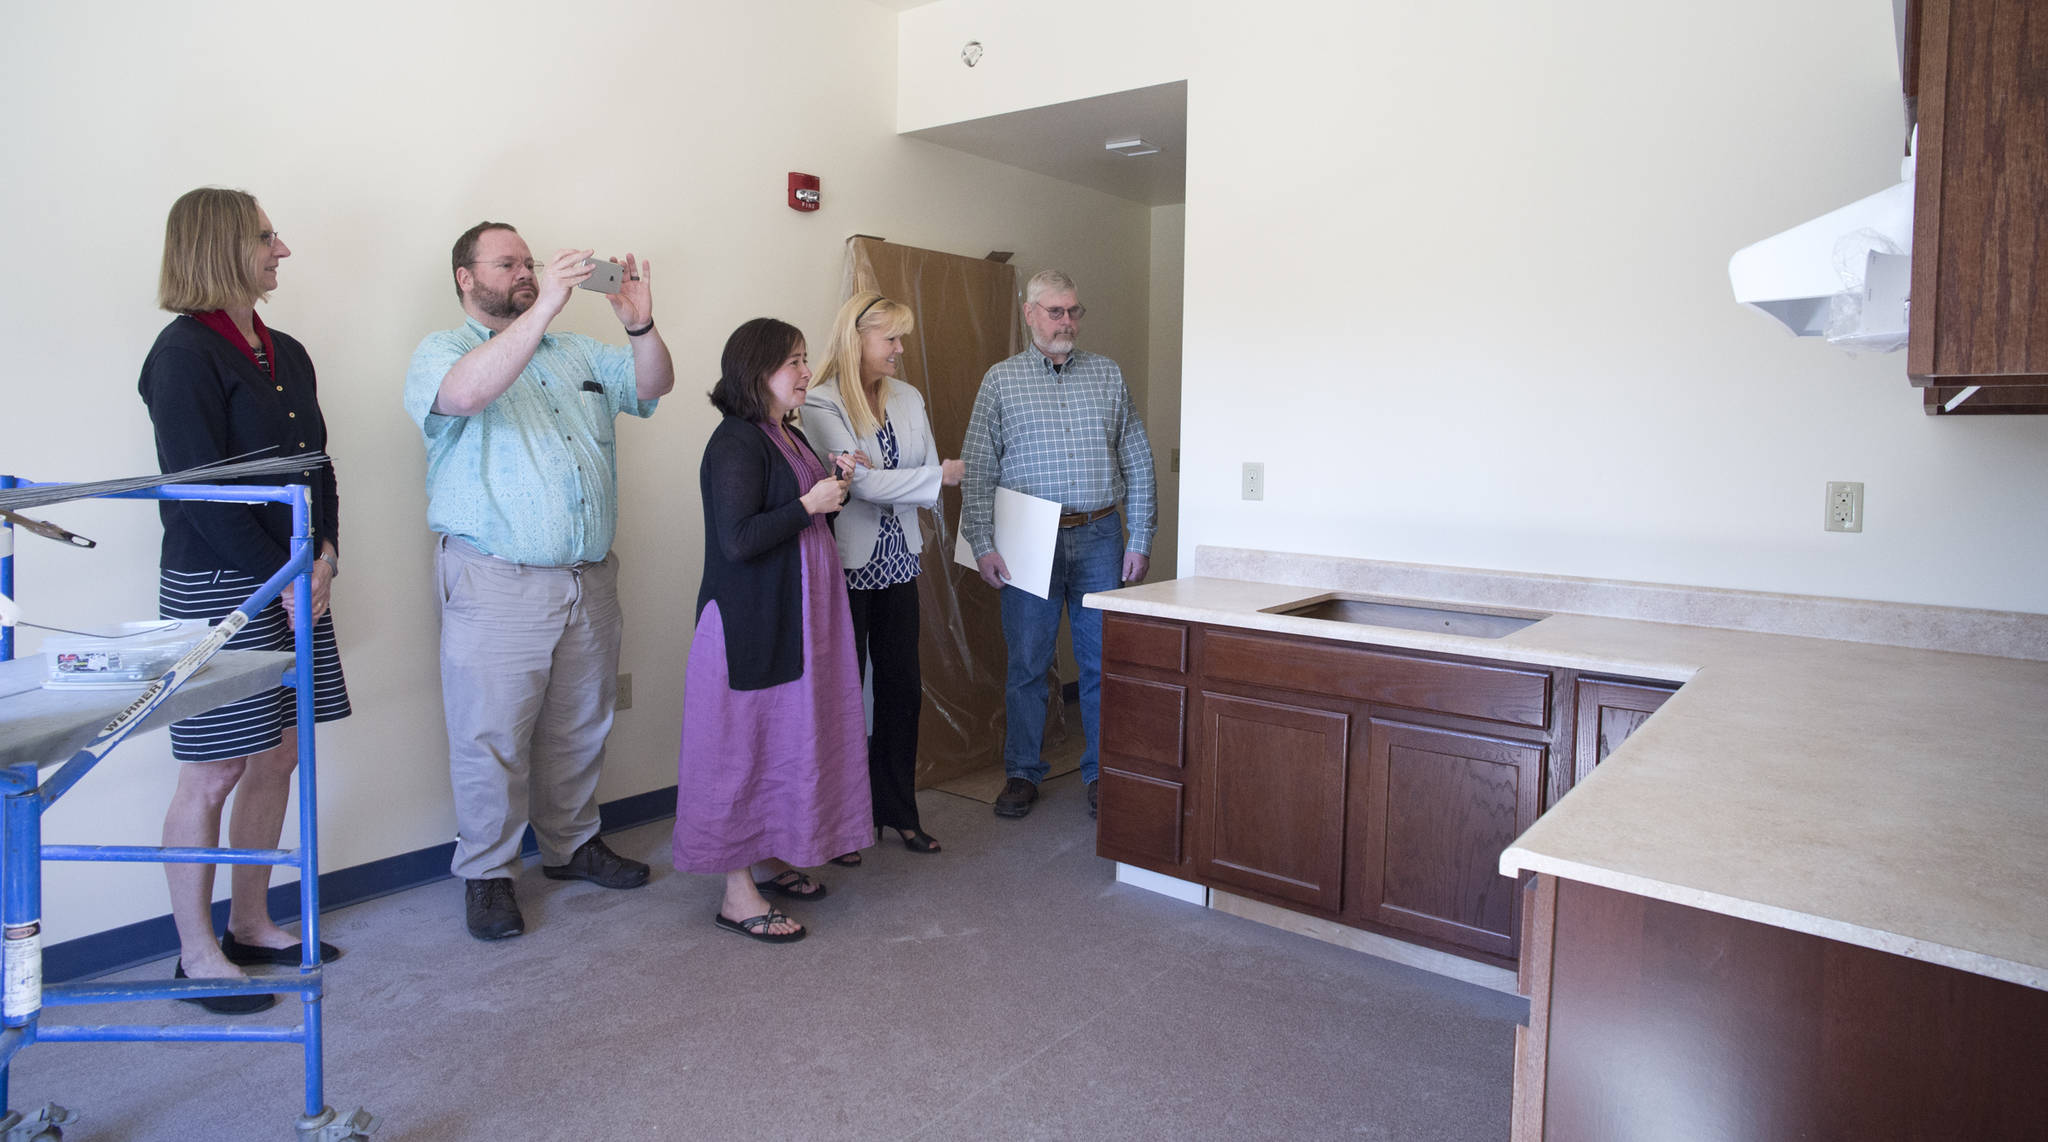 Amy Skilbred, left, Doug Harris, Chief Intergrated Services Officer of Juneau Alliance for Mental Health Inc., Mariya Lovishchuk, Executive Director of the Glory Hole, Karen West of Wells Fargo, and Steve Sorensen, board president of the Juneau Housing First Collaborative, take a tour of rooms near completion.